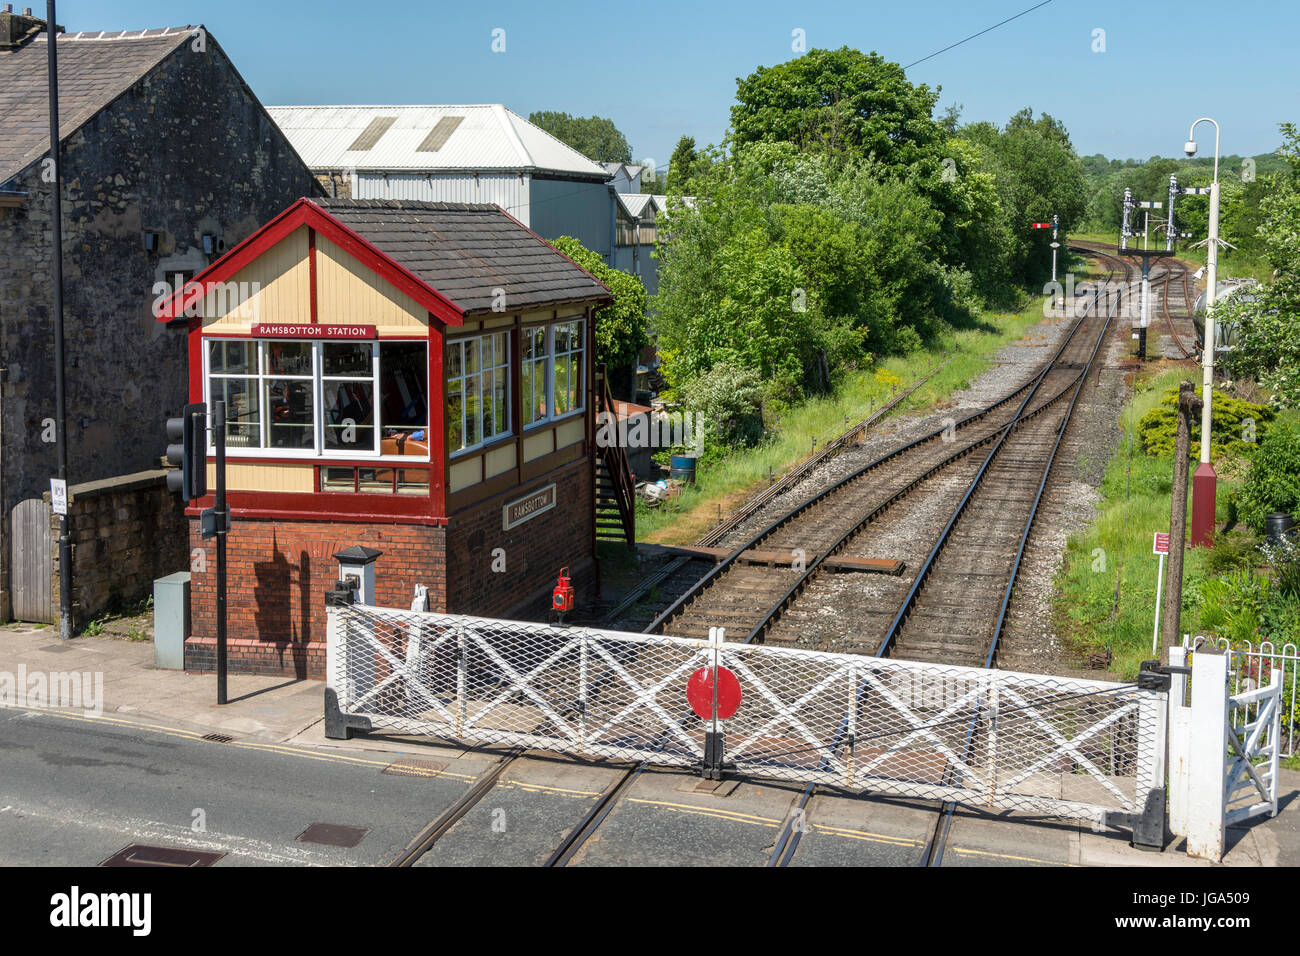 The signal box and level crossing (gates set for road travel), on the East Lancashire Railway at Ramsbottom, Greater Manchester, UK. Stock Photo